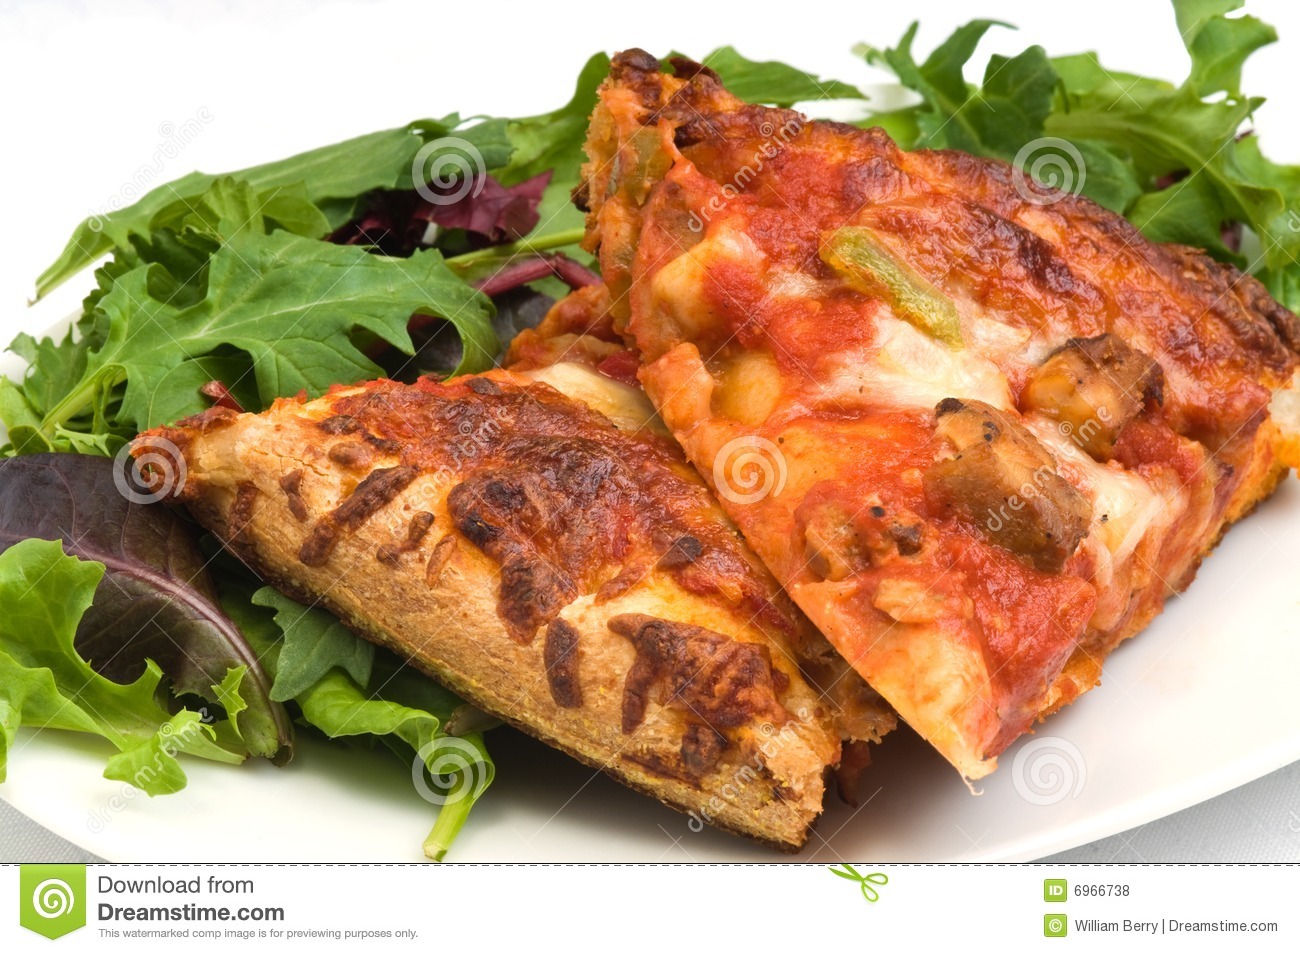 Homemade Pizza And Salad Royalty Free Stock Photos   Image  6966738